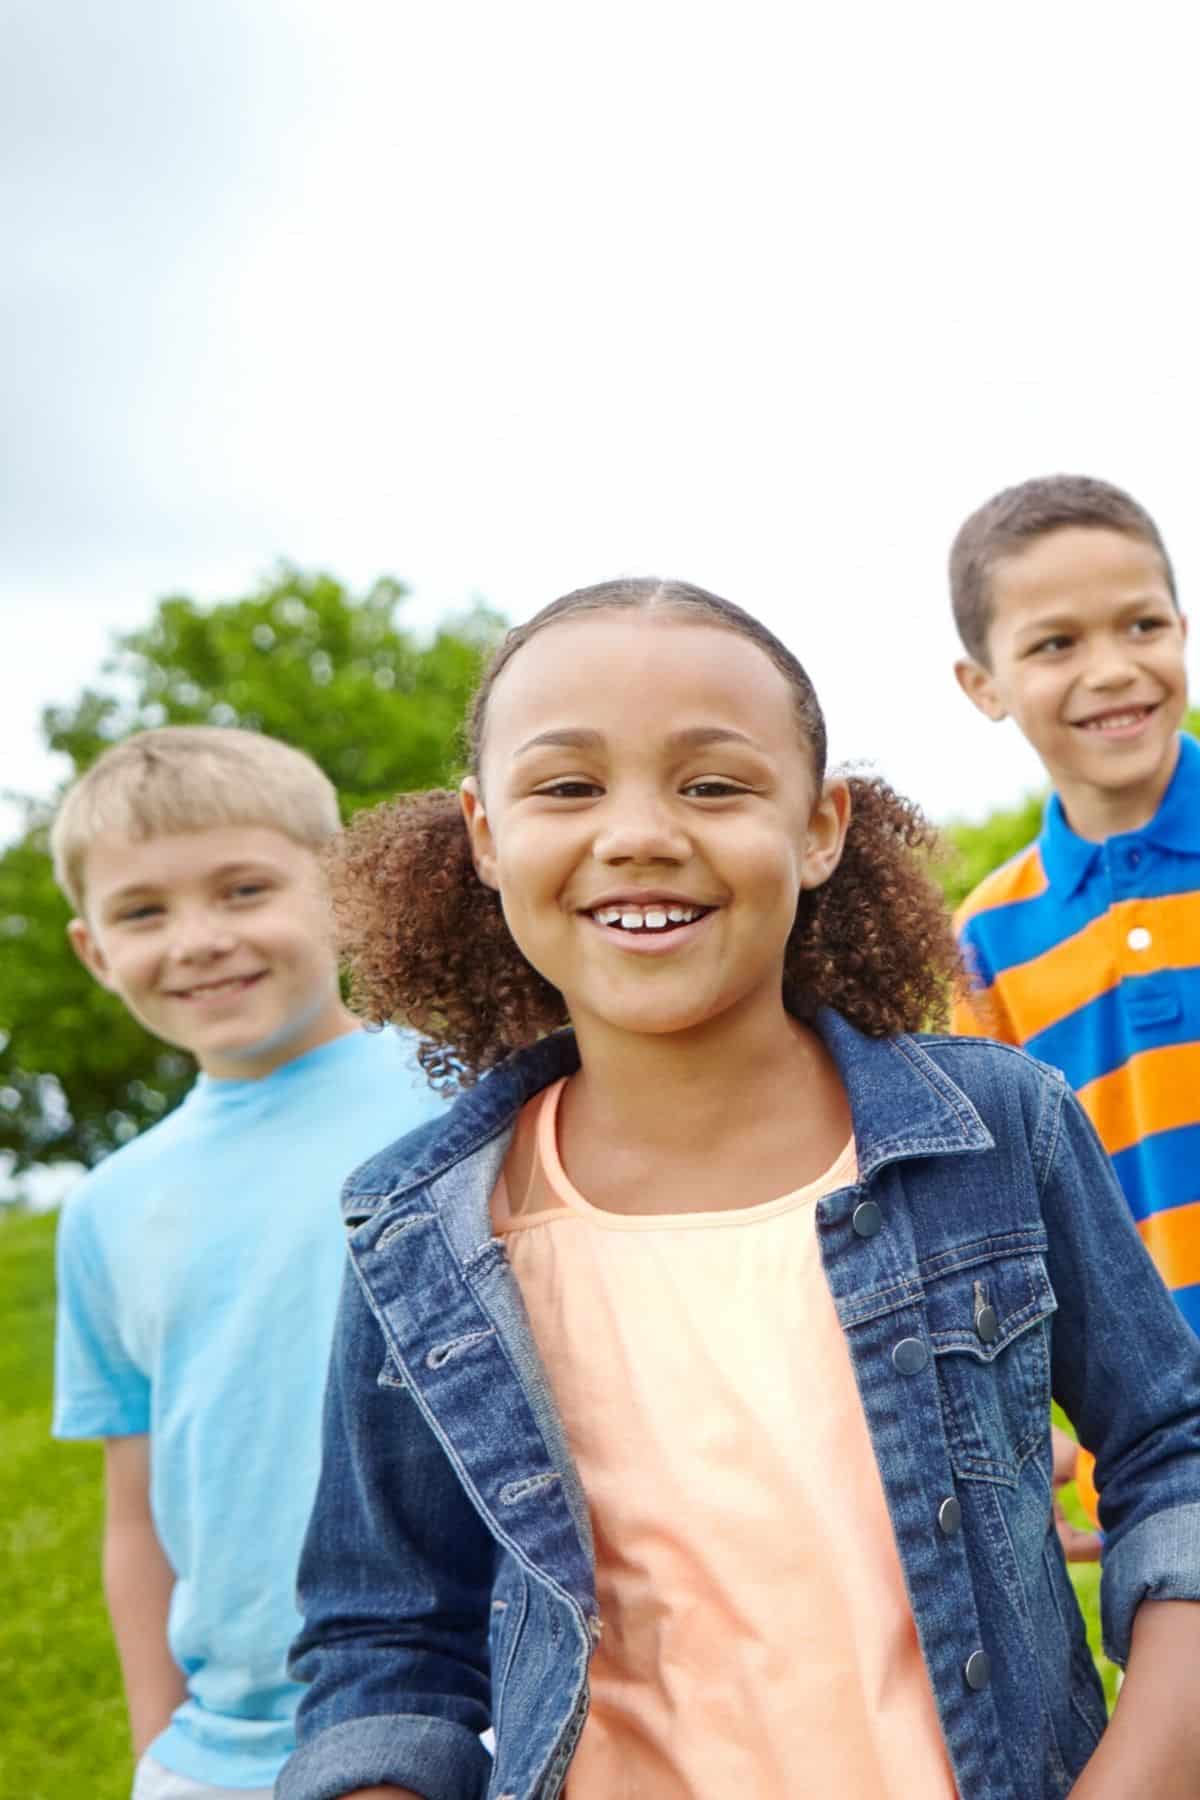 three smiling children at a park.